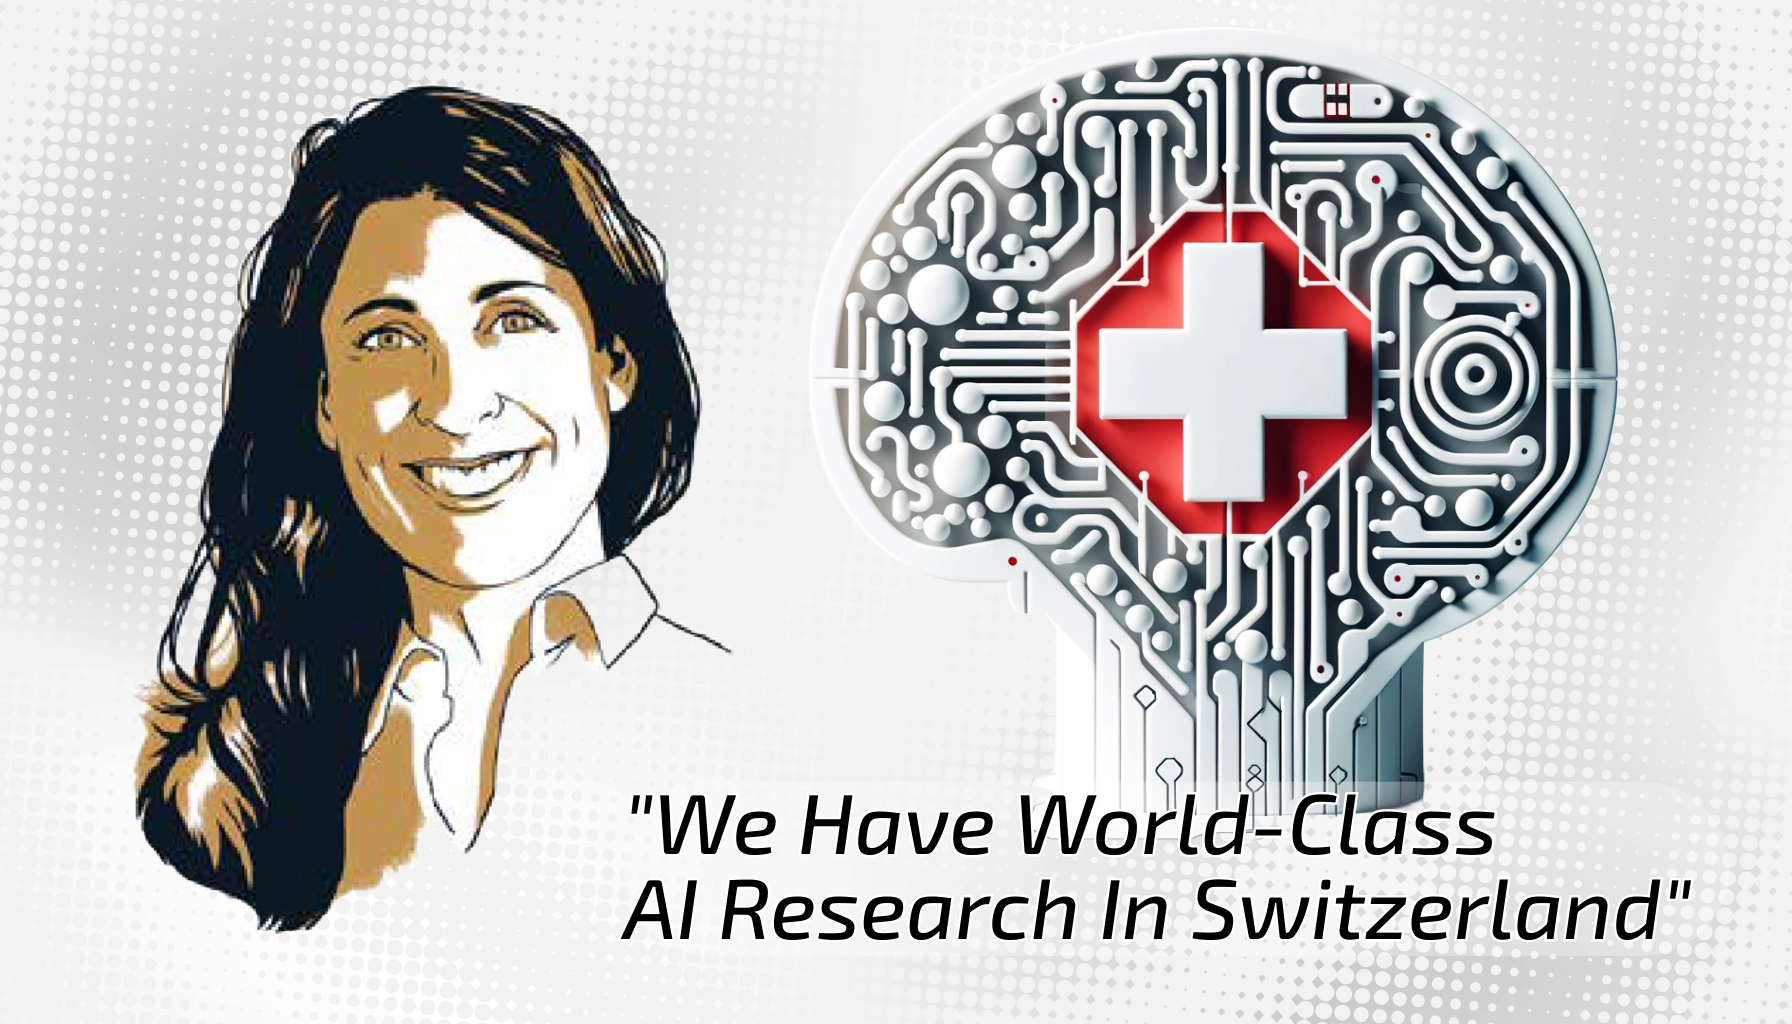 We Have World-Class AI Research In Switzerland - Dalith Steiger-Gablinger Interview